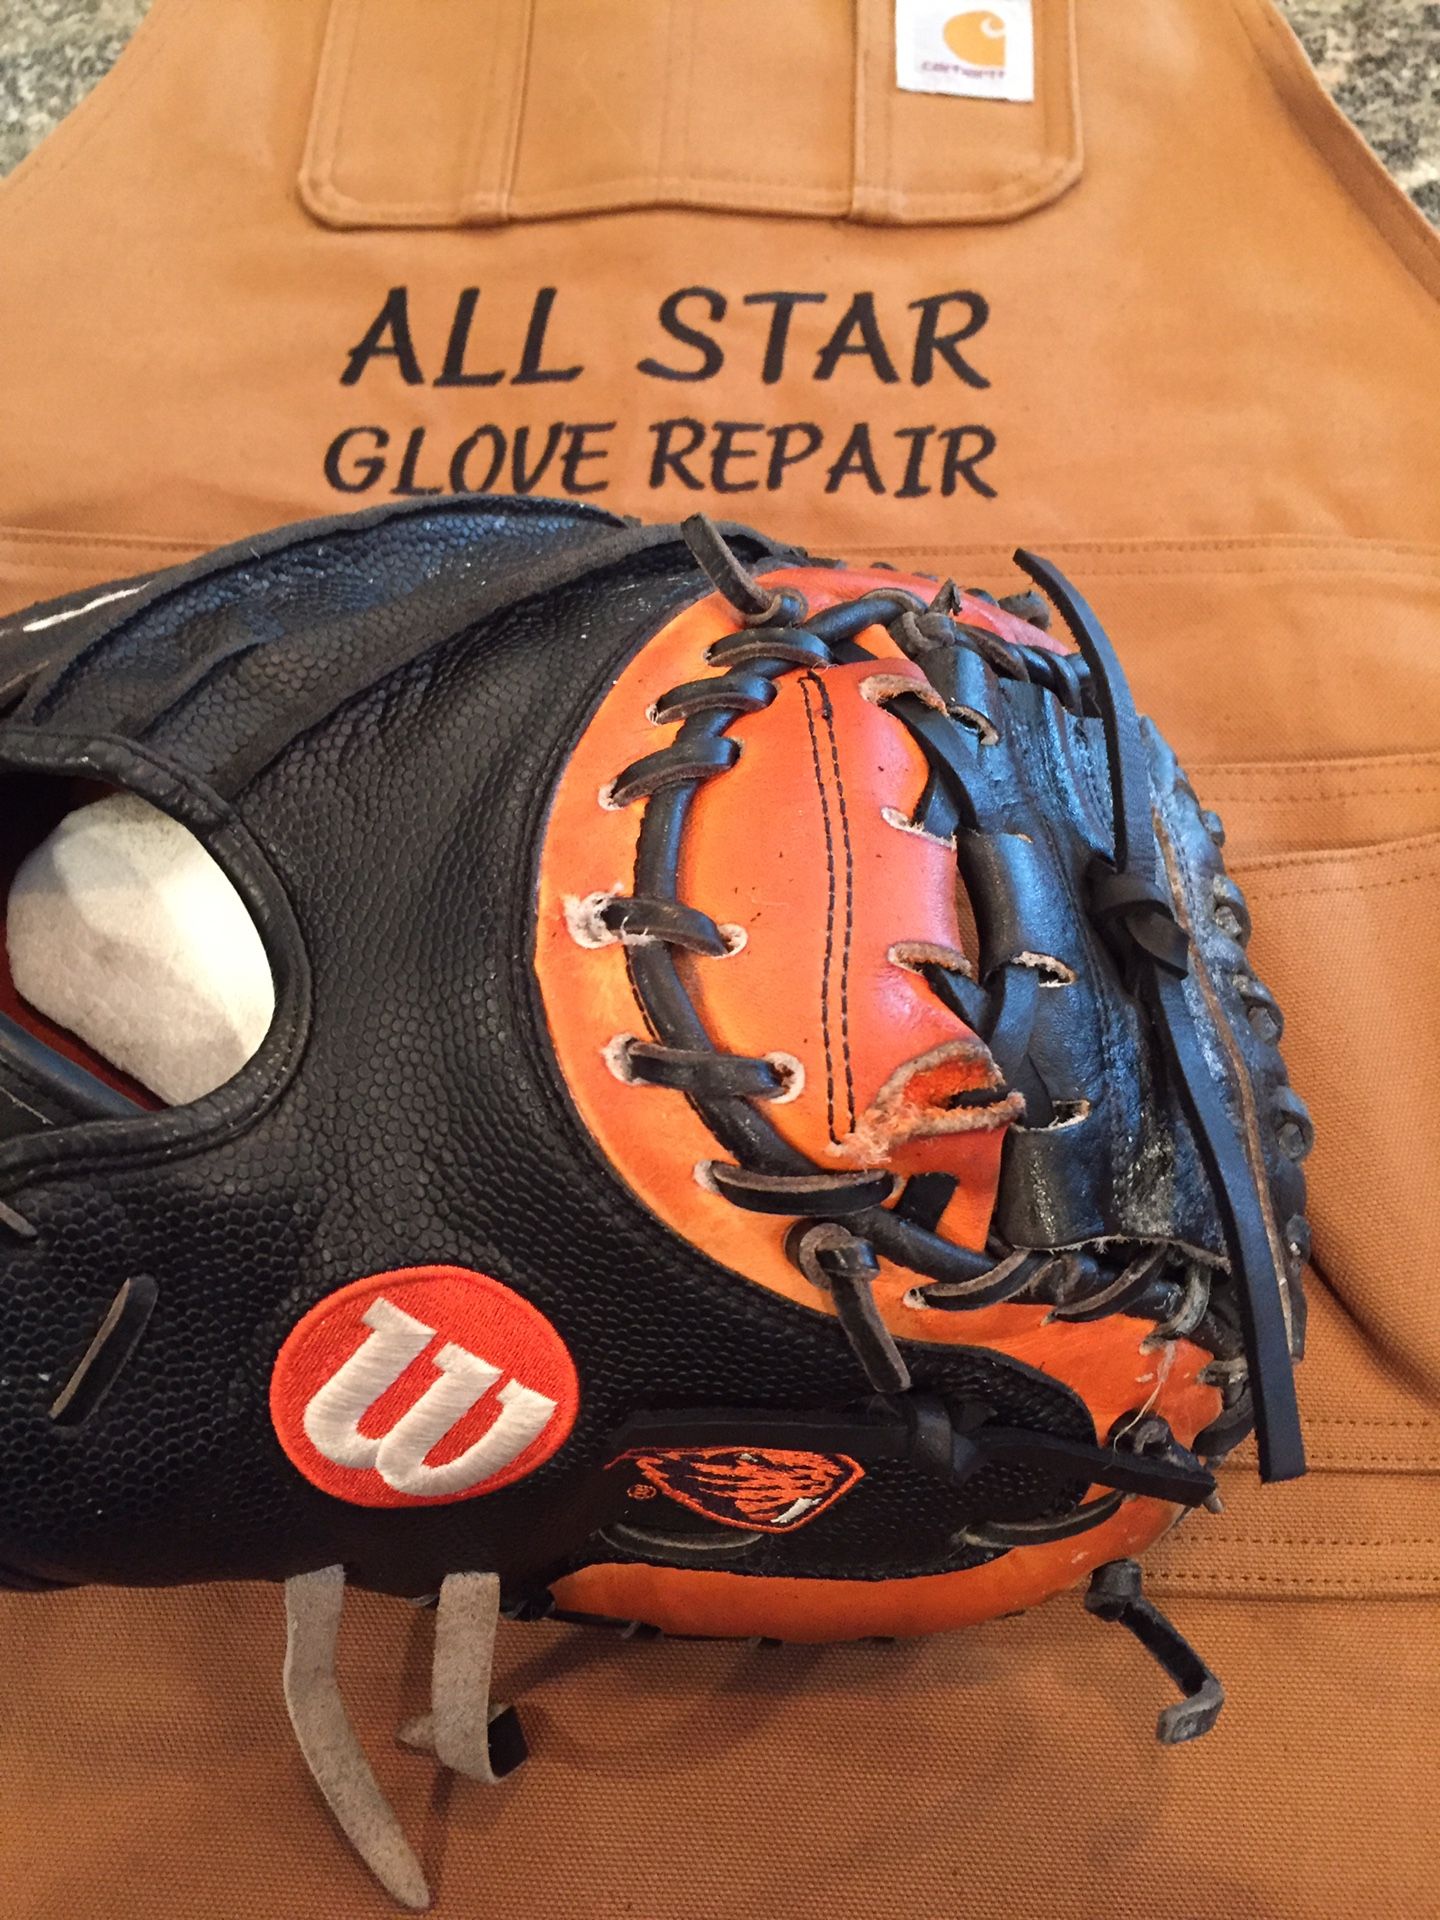 ***ALL-STAR GLOVE REPAIR*** Affordable baseball/softball glove re-lacing and conditioning!